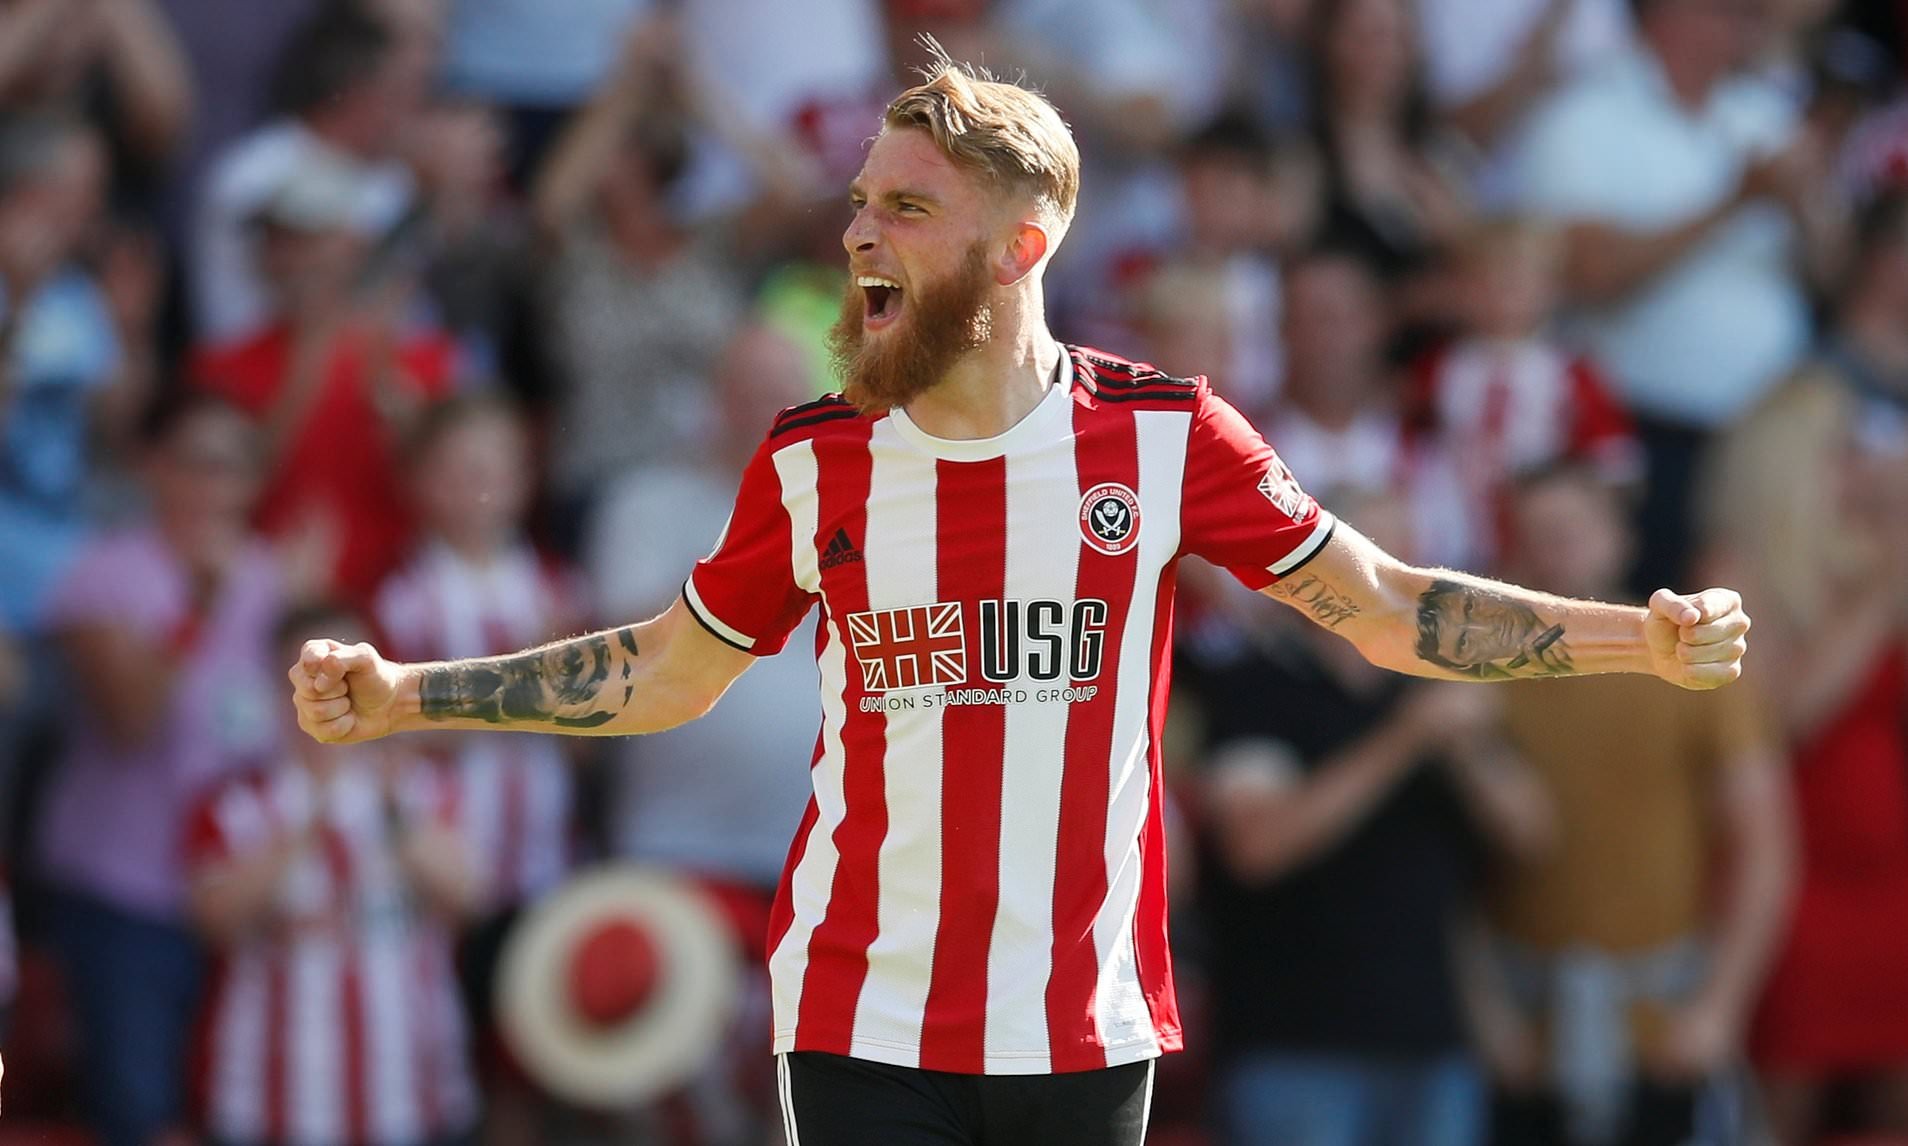 Sheffield United's Oli Mcburnie Responds to Getting a Red Card Against Tottenham Hotspur